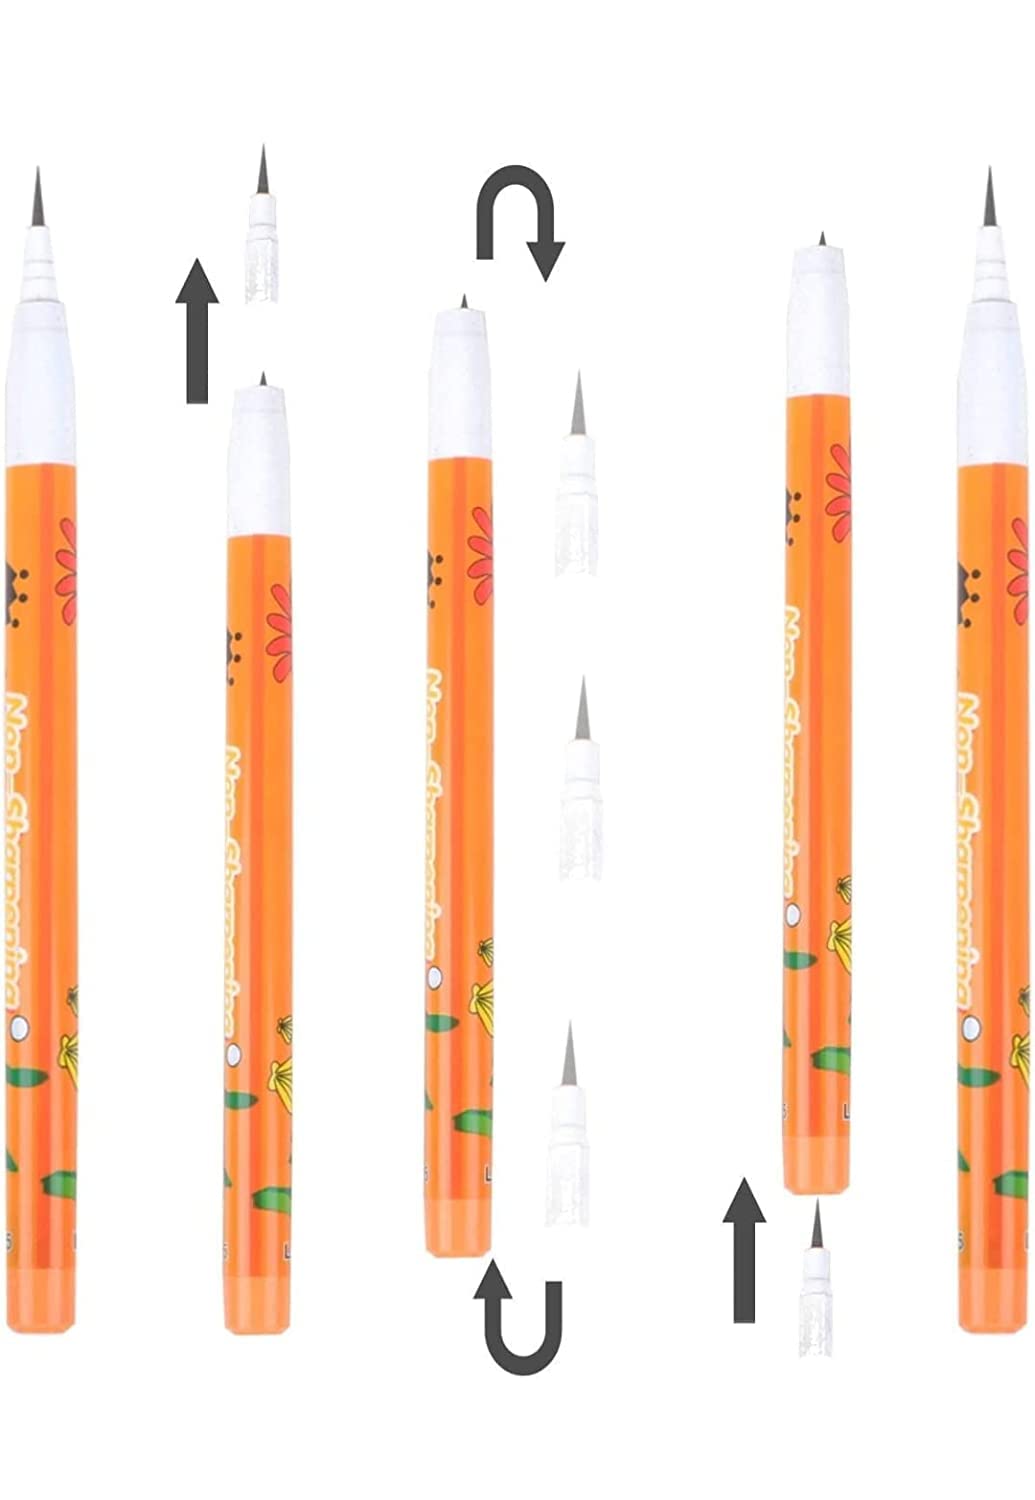 AMKAY Whistle Push Pencil Non Sharpening for kids for Return Gift Pencil Pack of 5